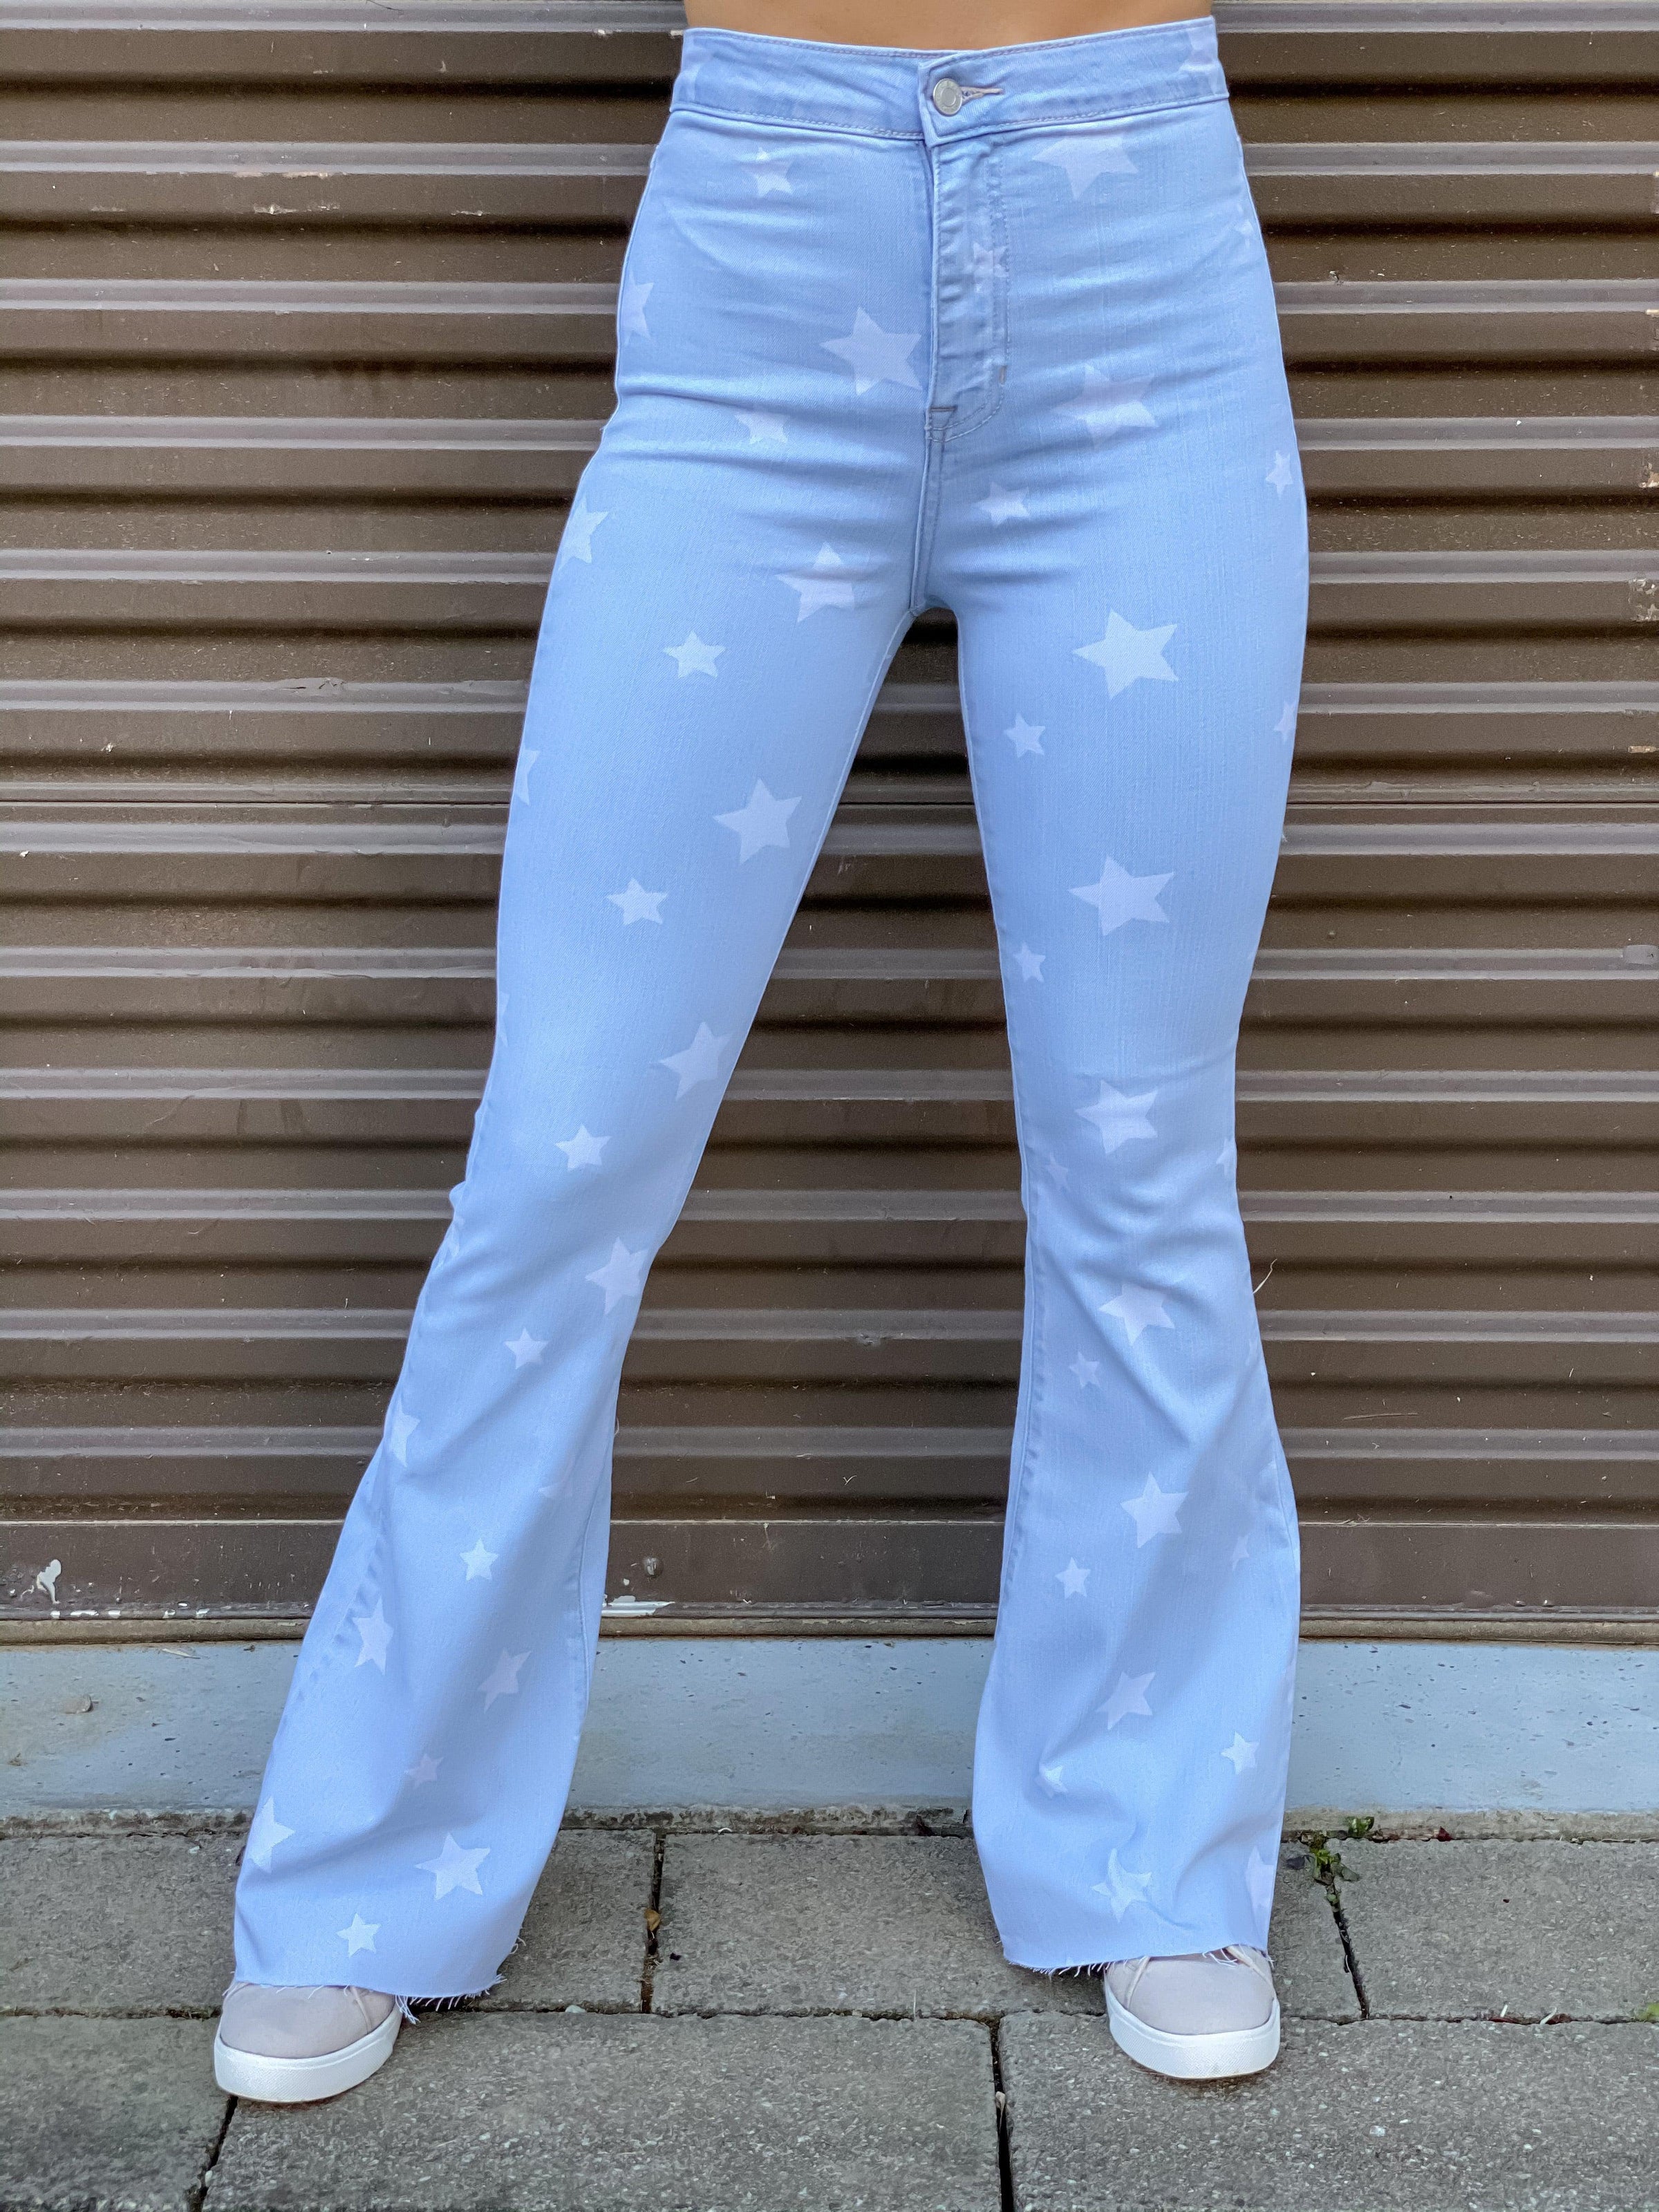 bell bottom jeans with stars on them